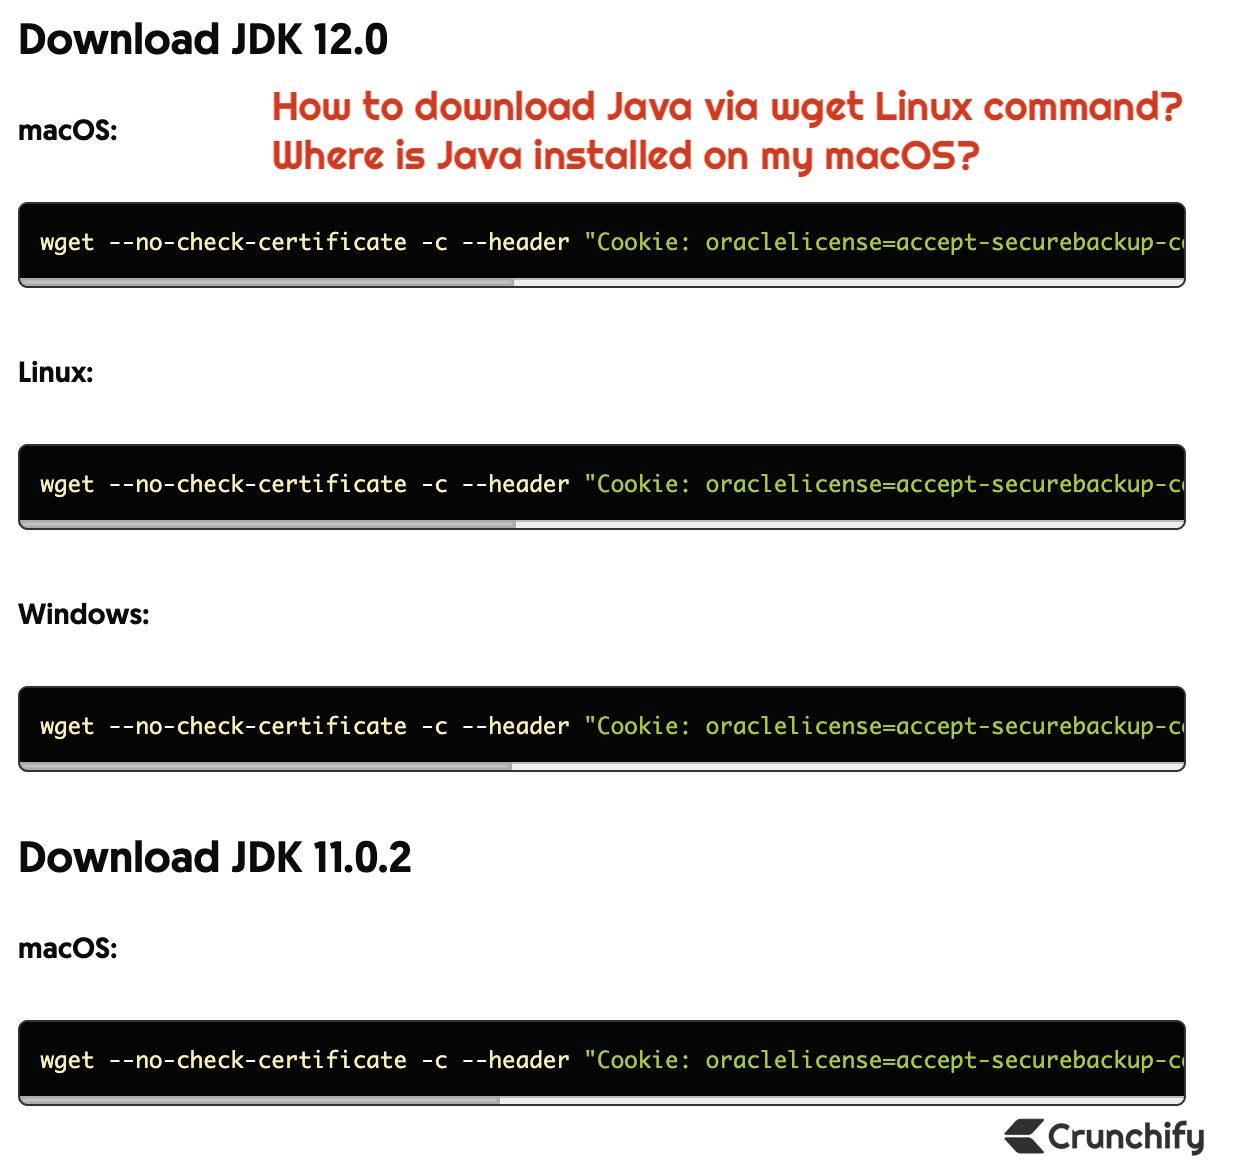 install java 1.6 for mac